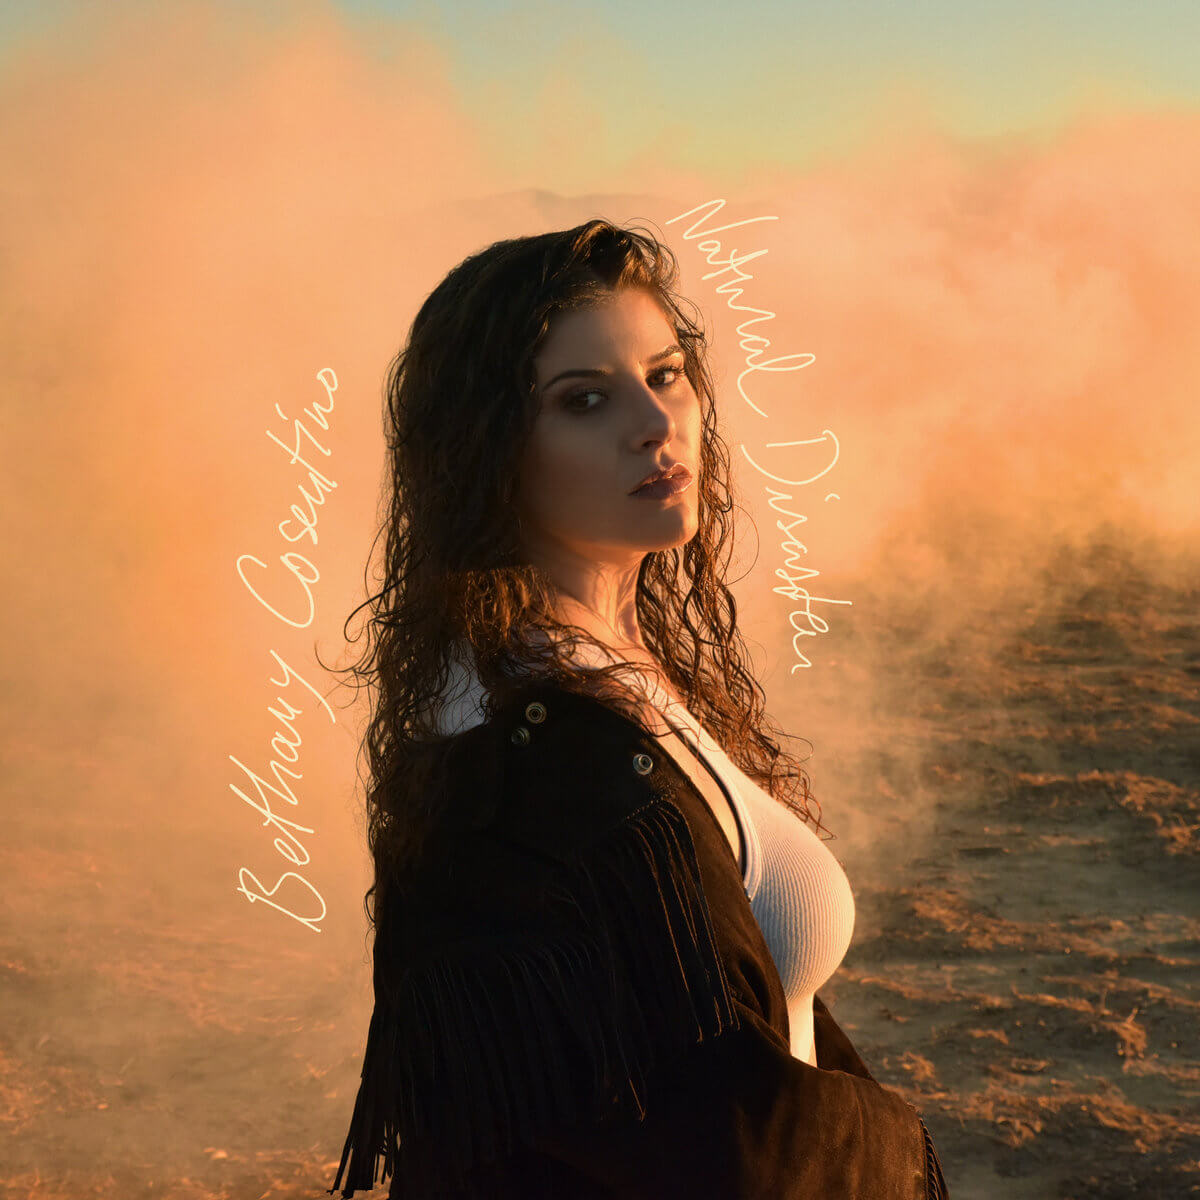 Natural Disaster by Bethany Cosentino album review by Leslie Ken Chu. The artist's debut solo album, arrives on July 28th via Concord records